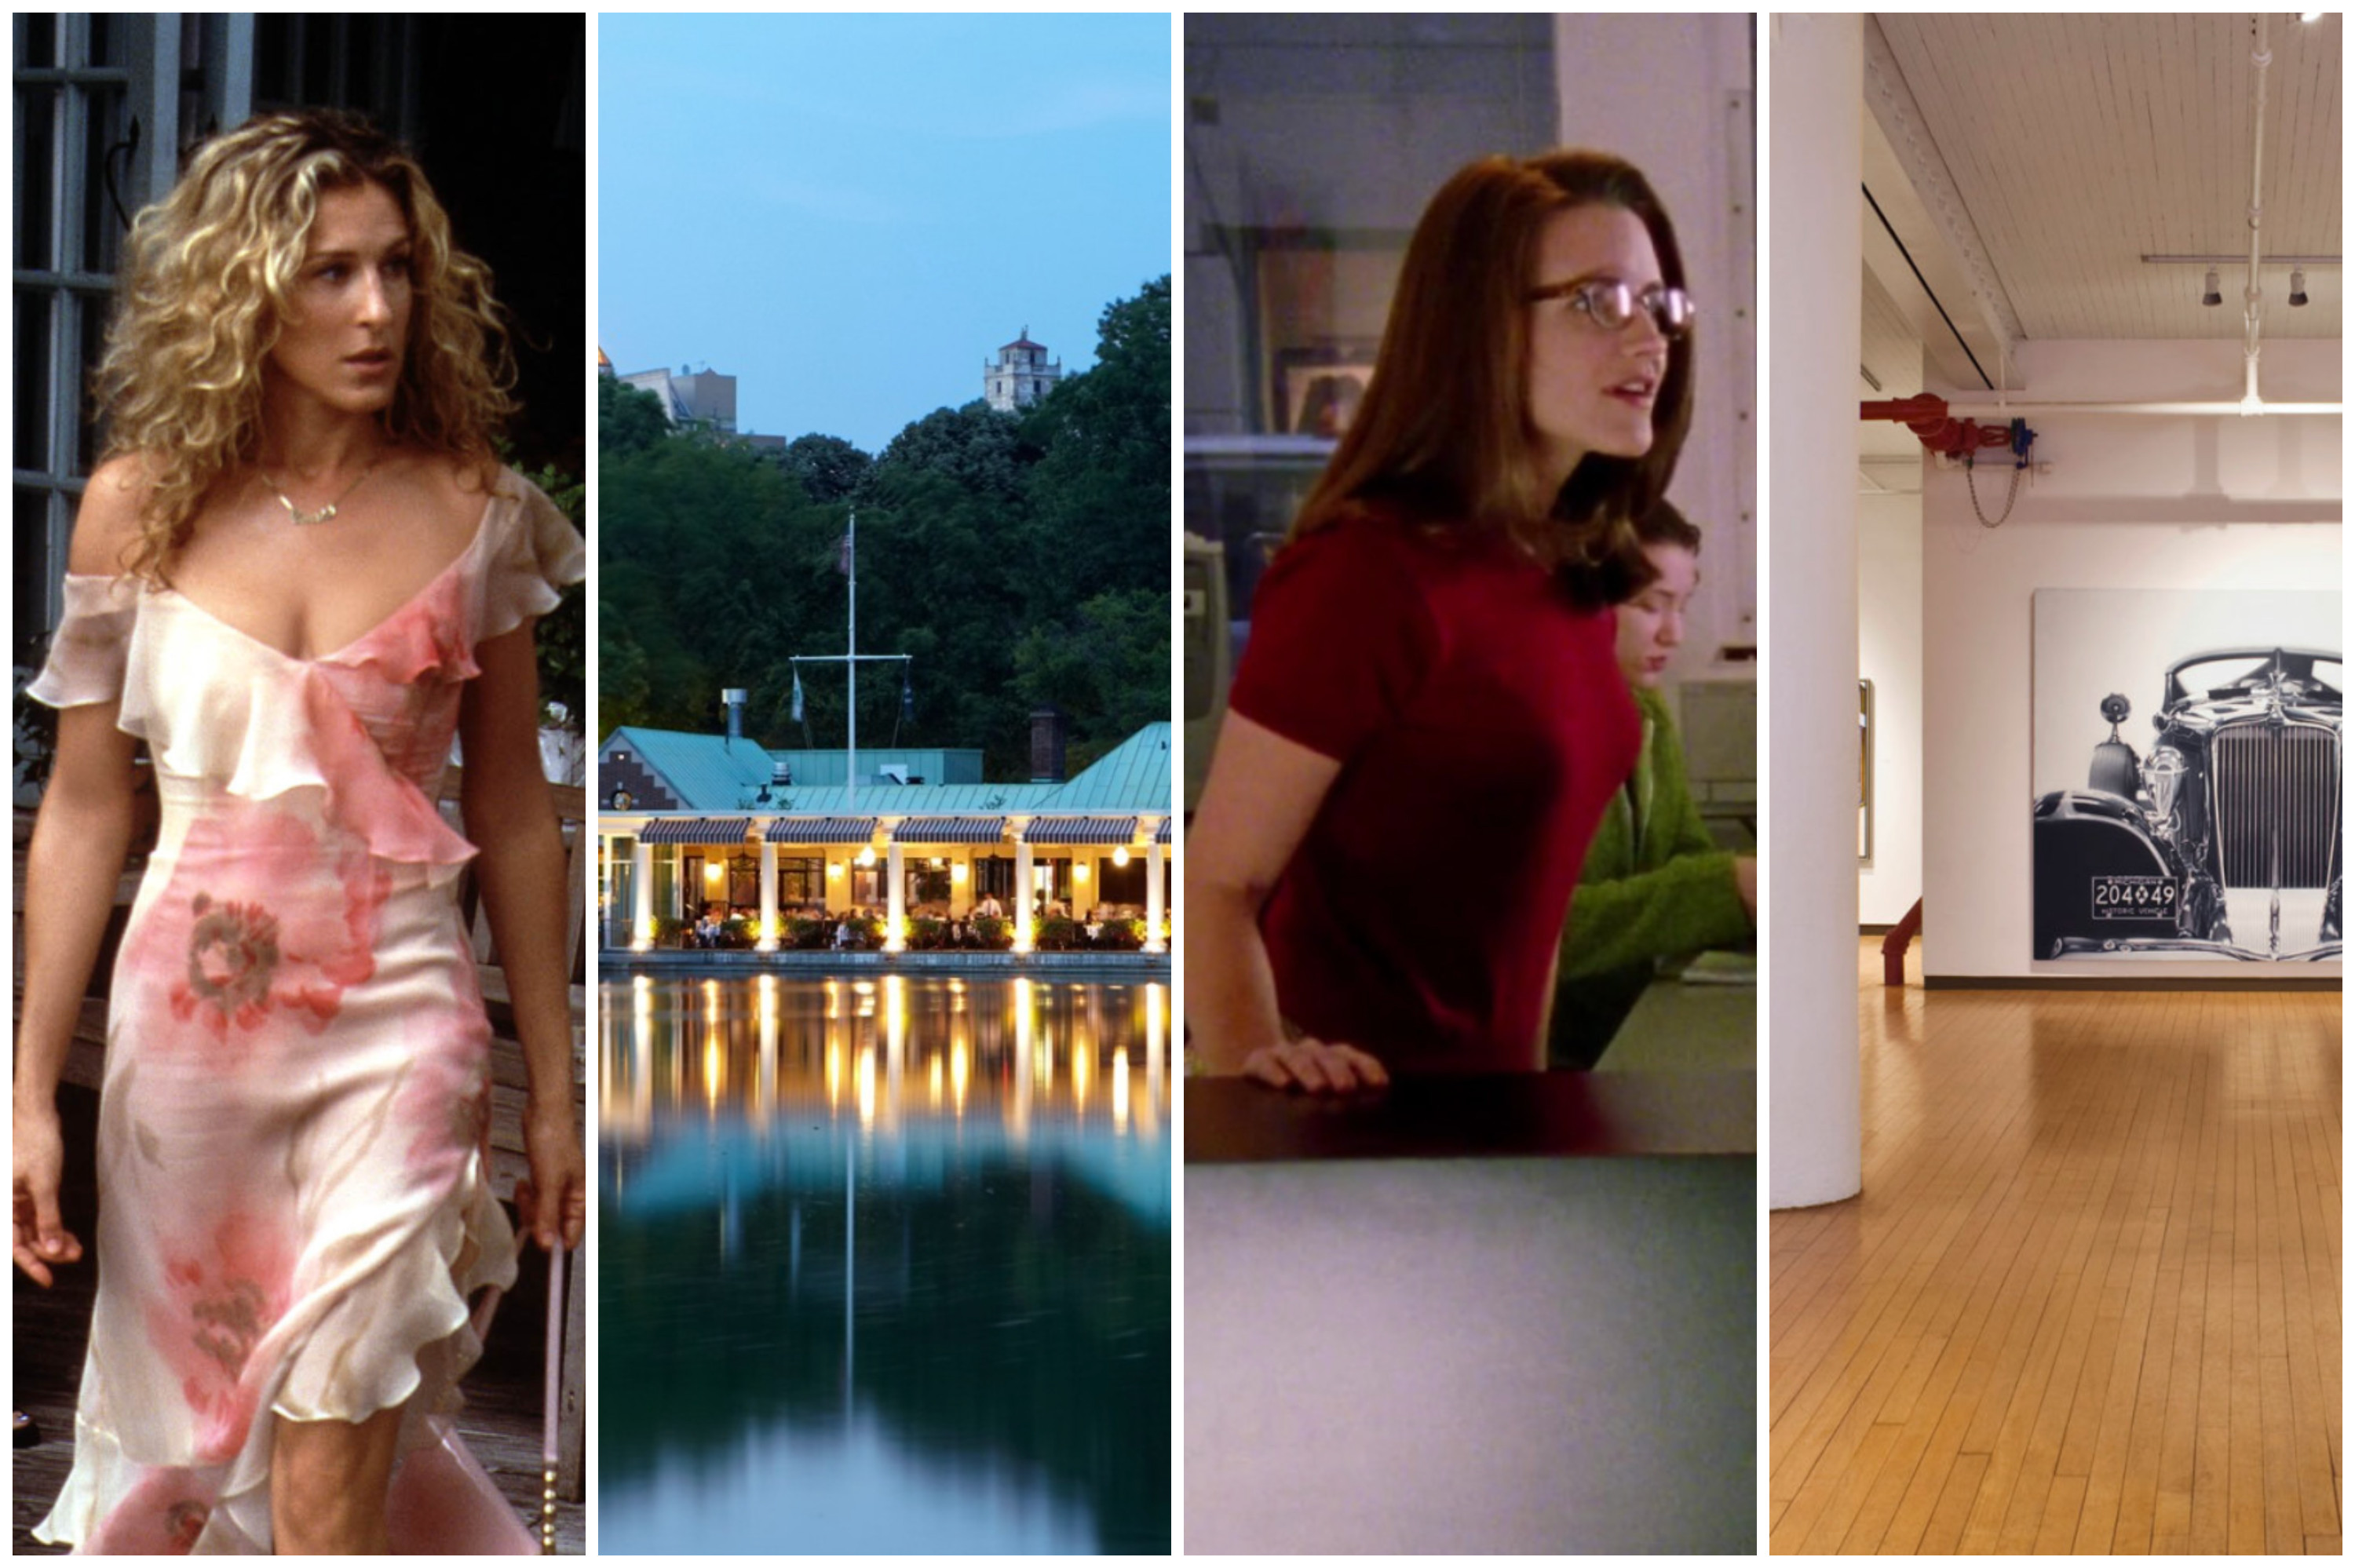 Sex and the City scenes filmed across New York, at locations including Loeb Boathouse and Louis K. Meisel Gallery. Photos: Getty Images; The Loeb Boathouse at Central Park/Facebook; The Loeb Boathouse at Central Park/Facebook; Louis K. Meisel Gallery/Facebook